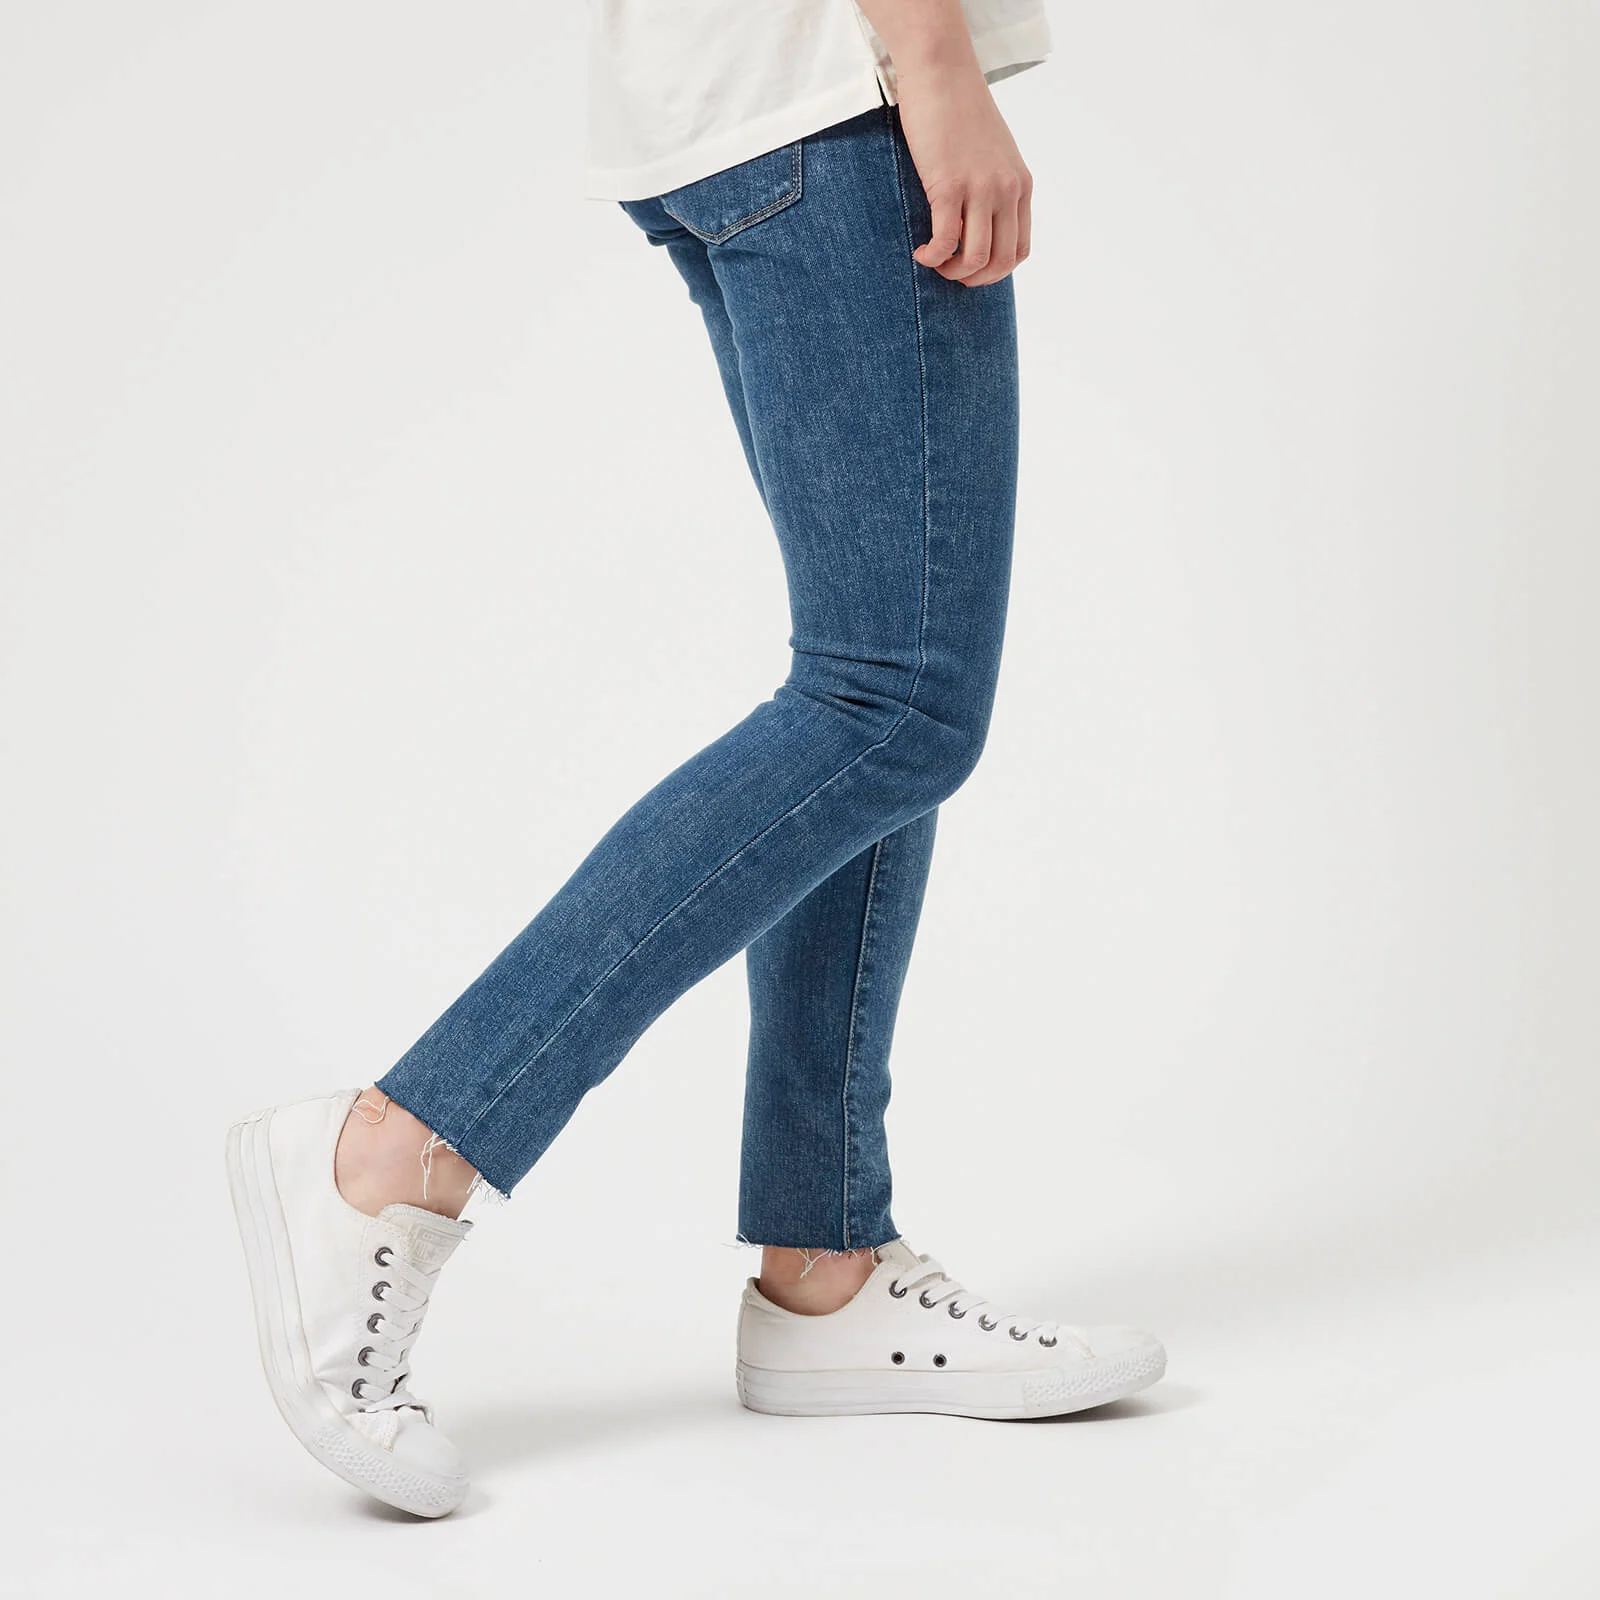 Levi's Women's 721 High Rise Skinny Jeans - Charged Up Image 1